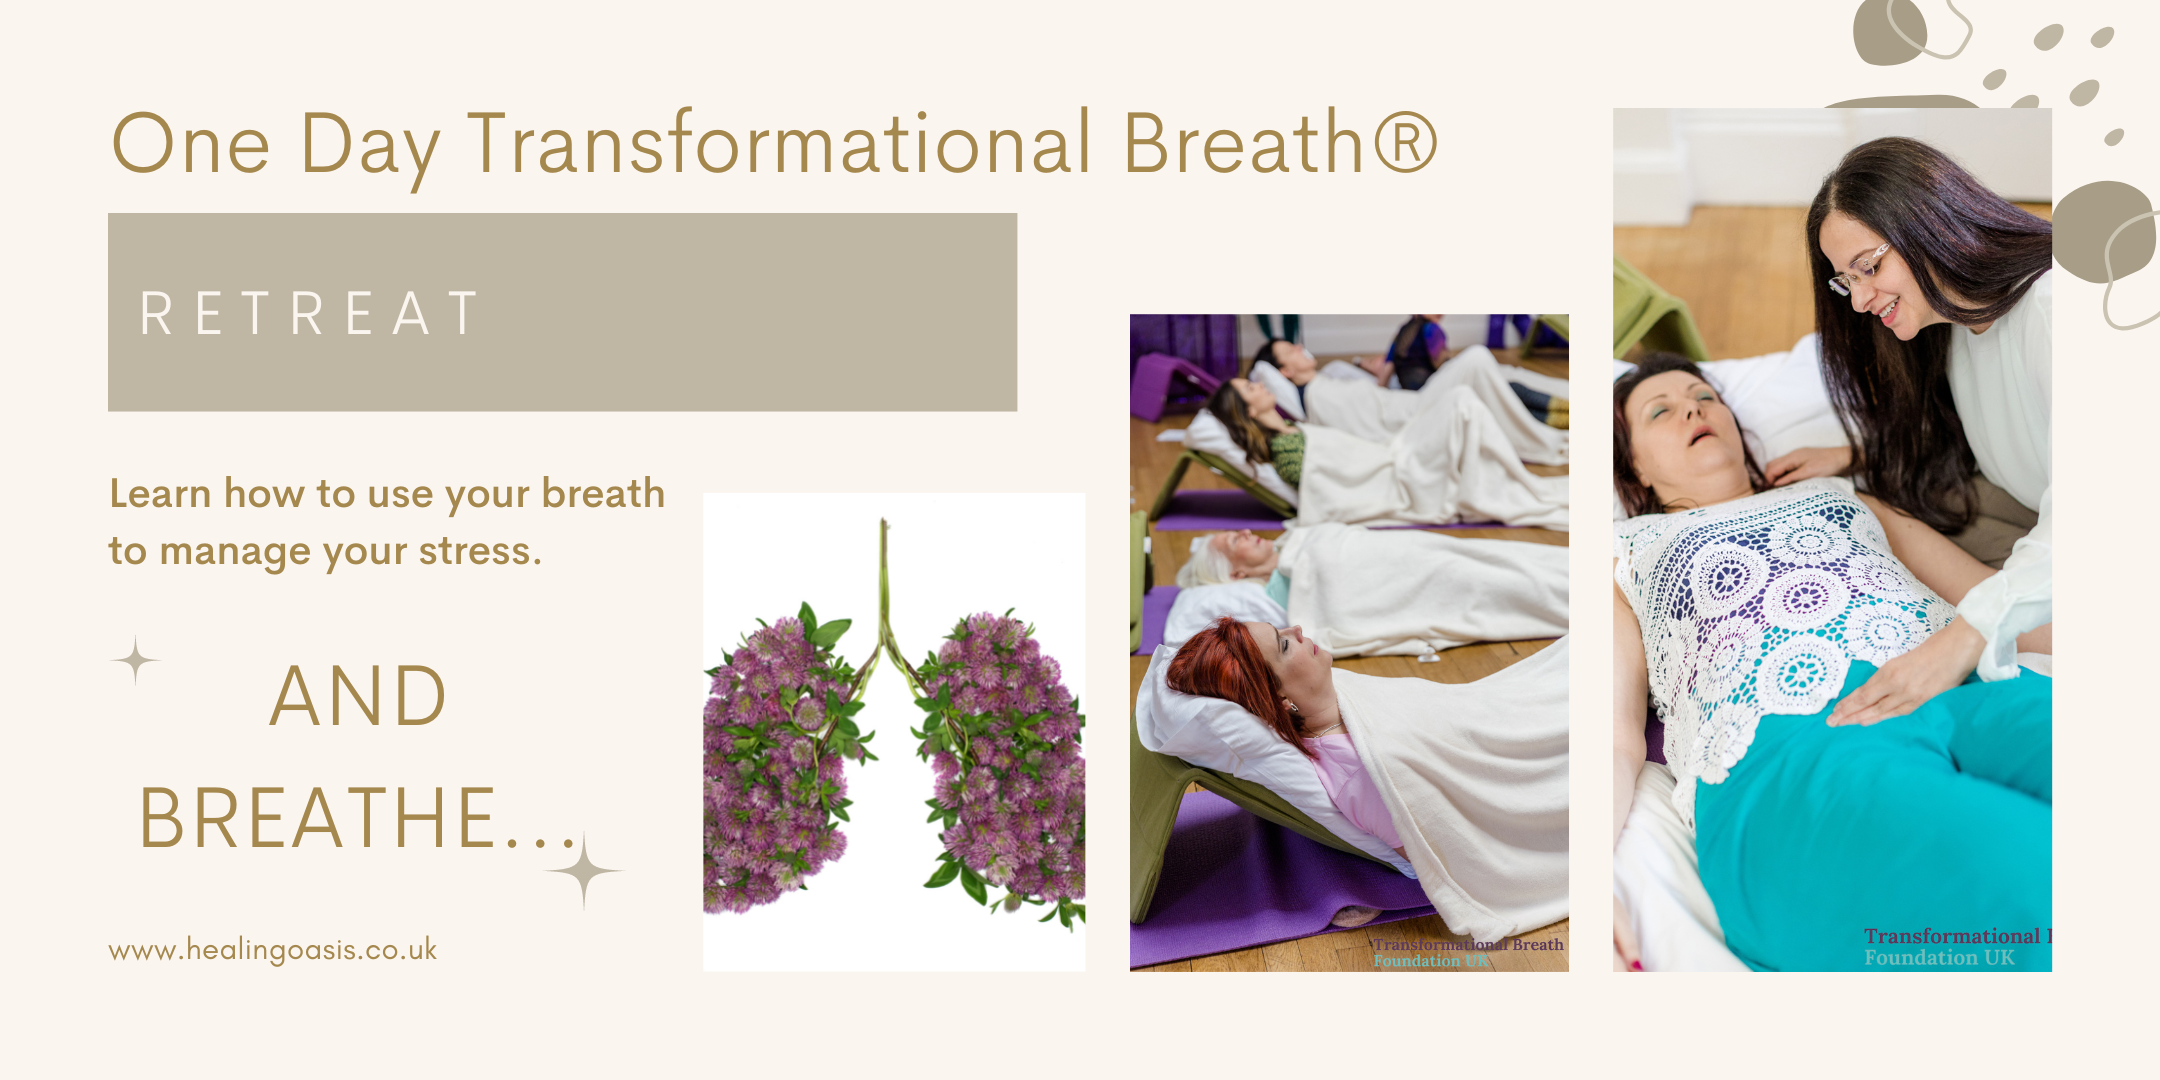 One Day Transformational Breath® Retreat To Learn How To Manage Your Stress